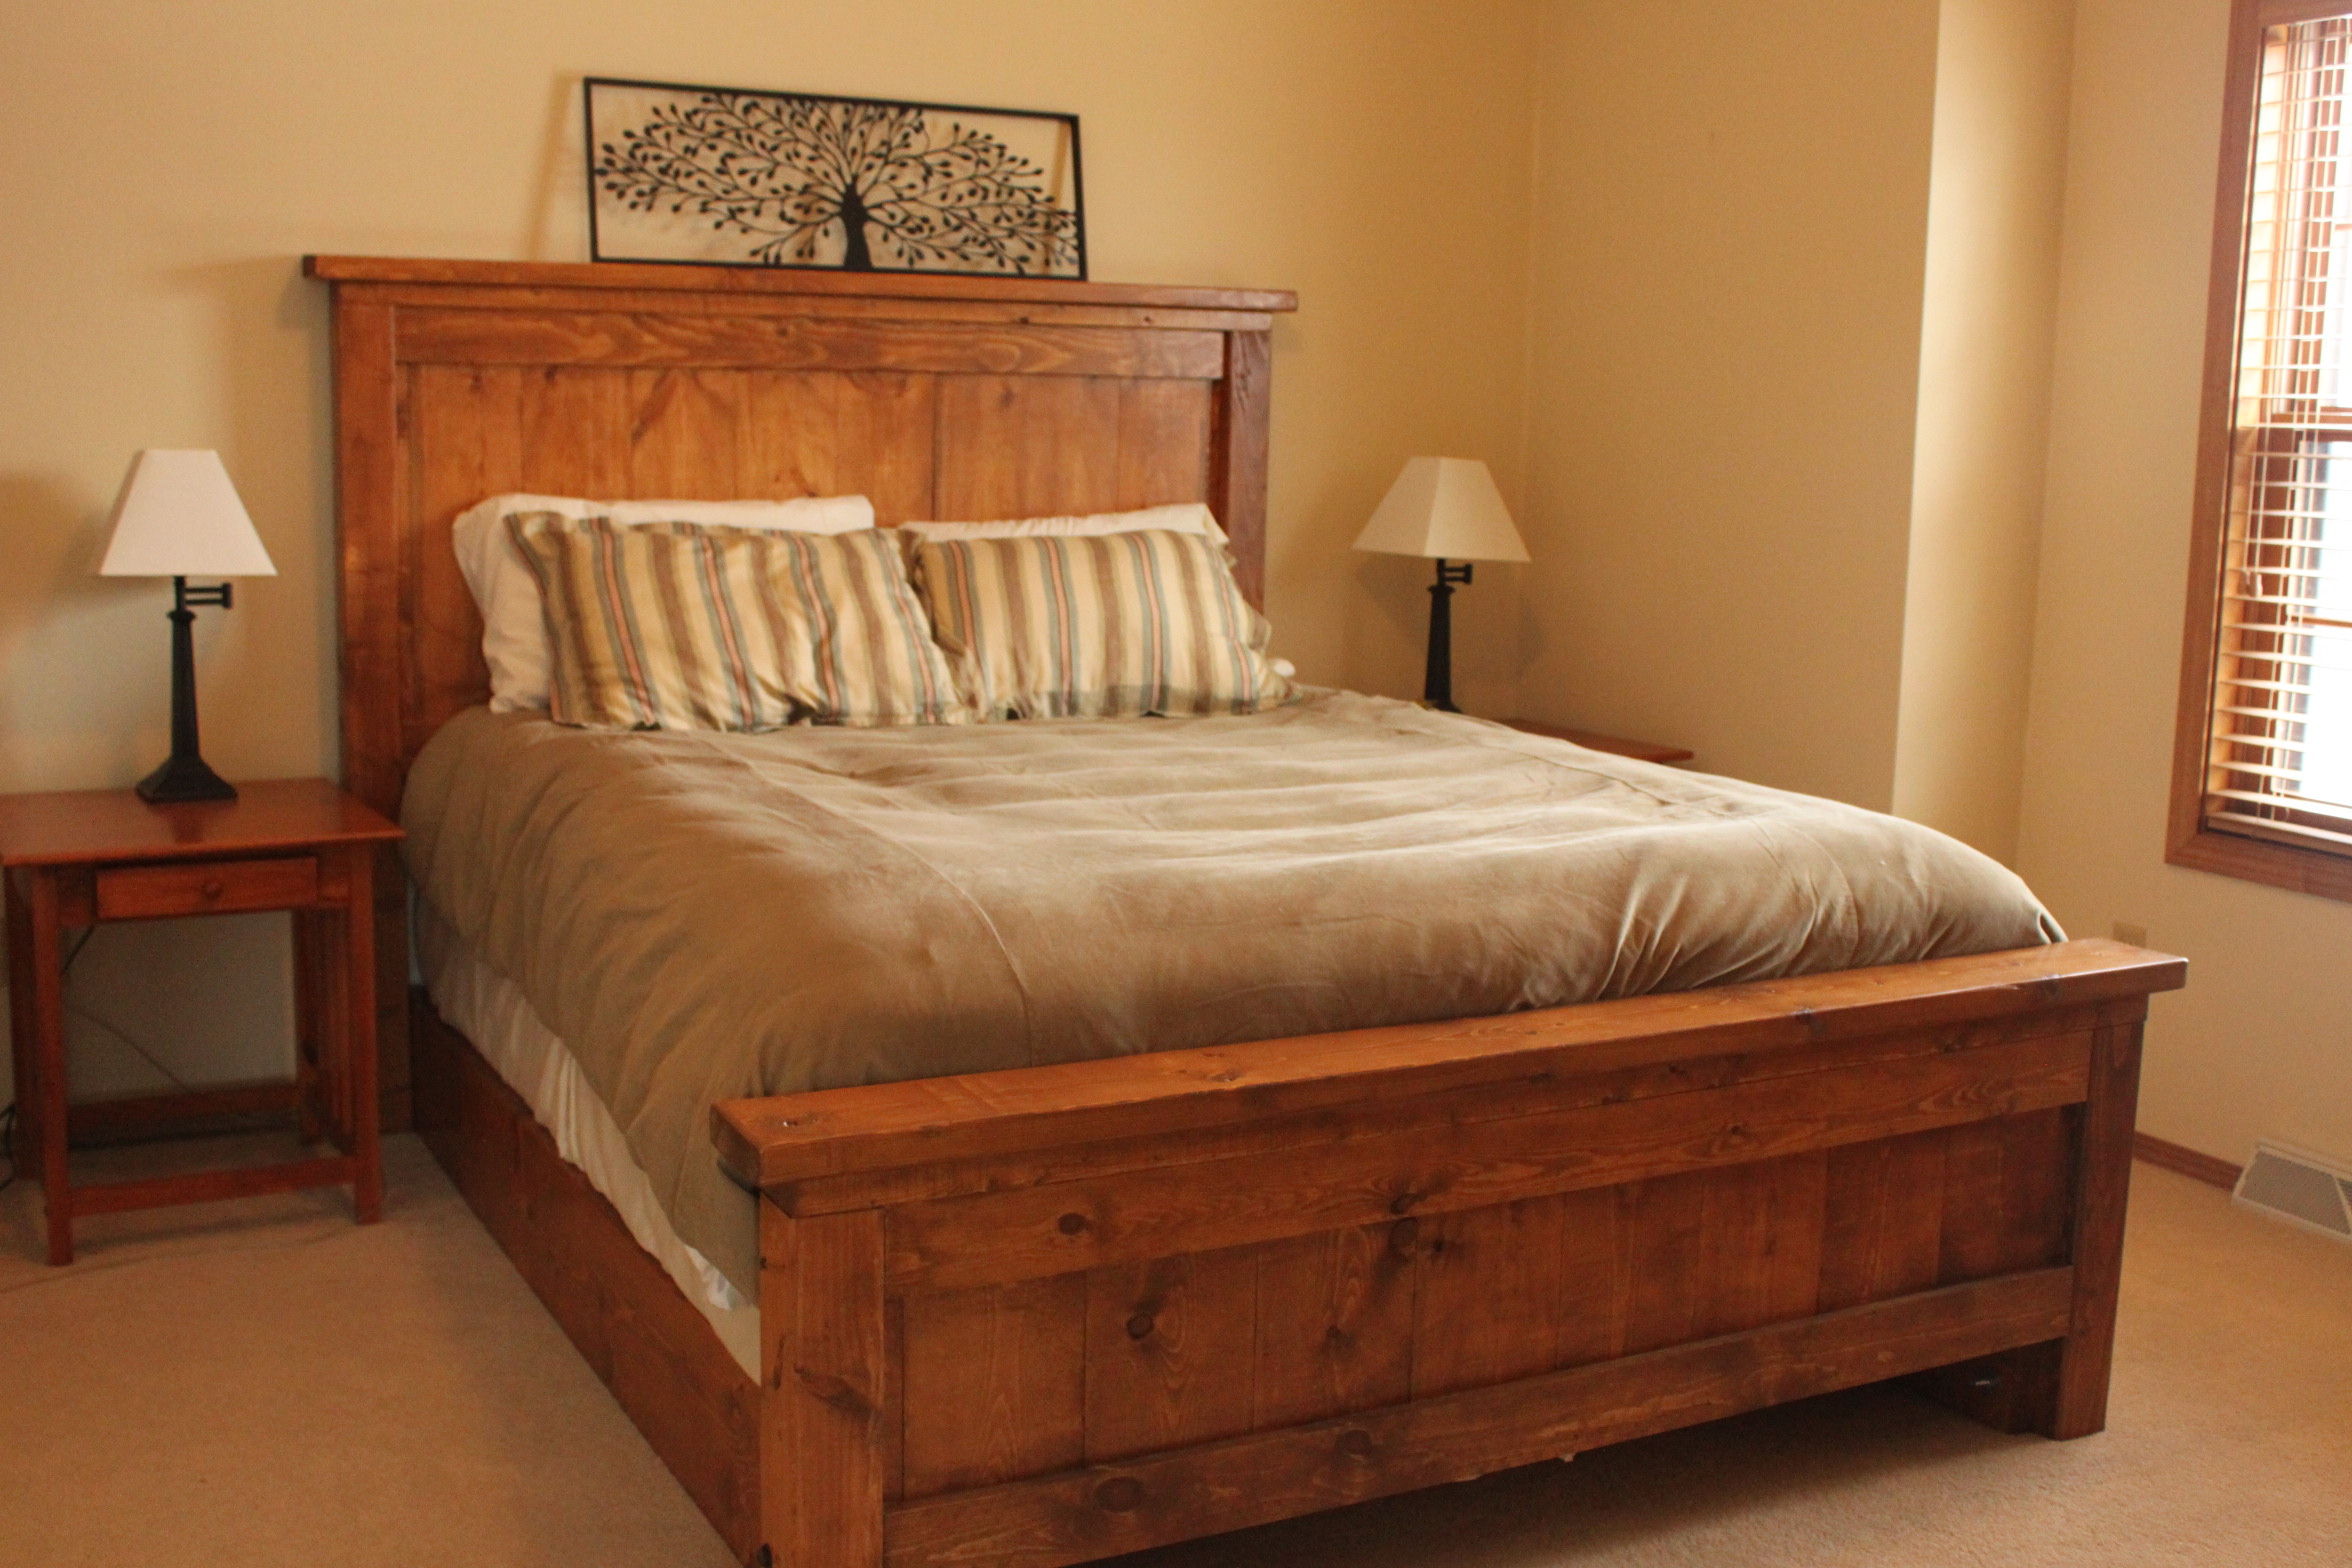 Our Farmhouse bed | Do It Yourself Home Projects from Ana White